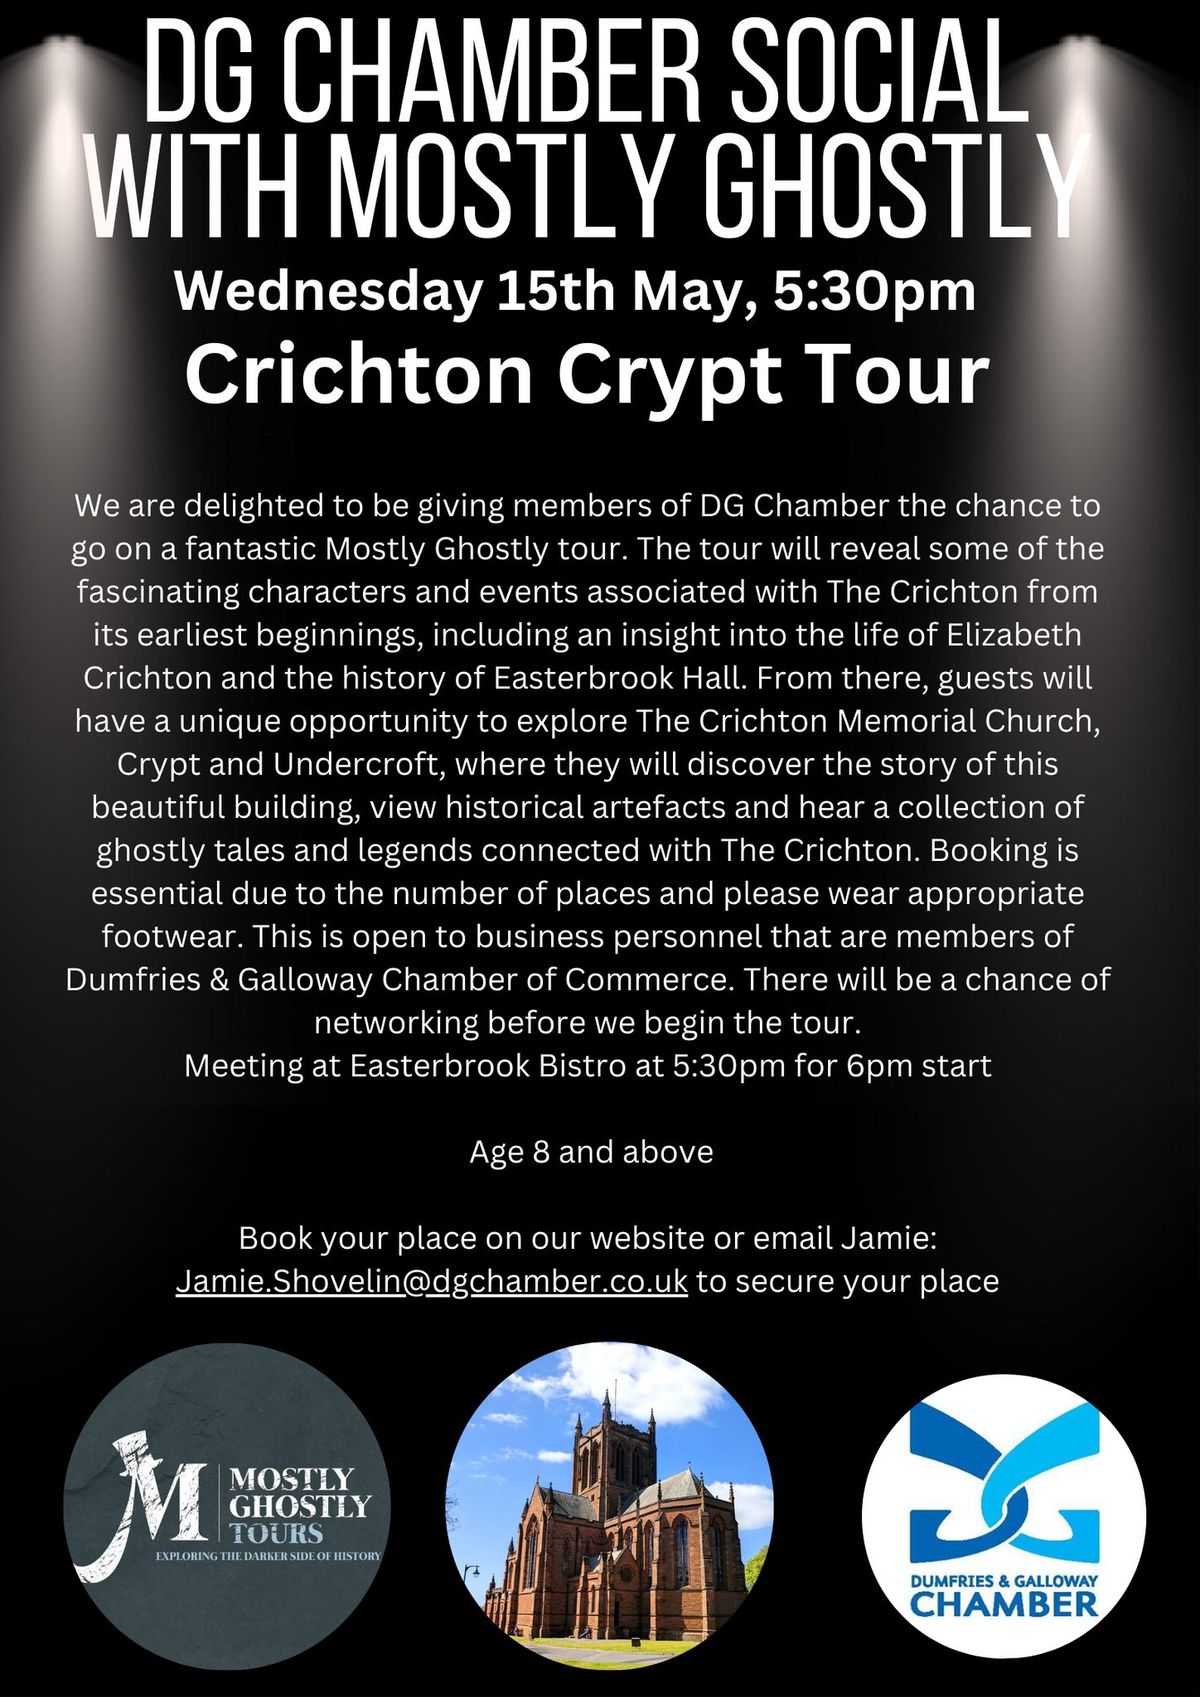 DG Chamber social with Mostly Ghostly - Crichton Crypt Tour